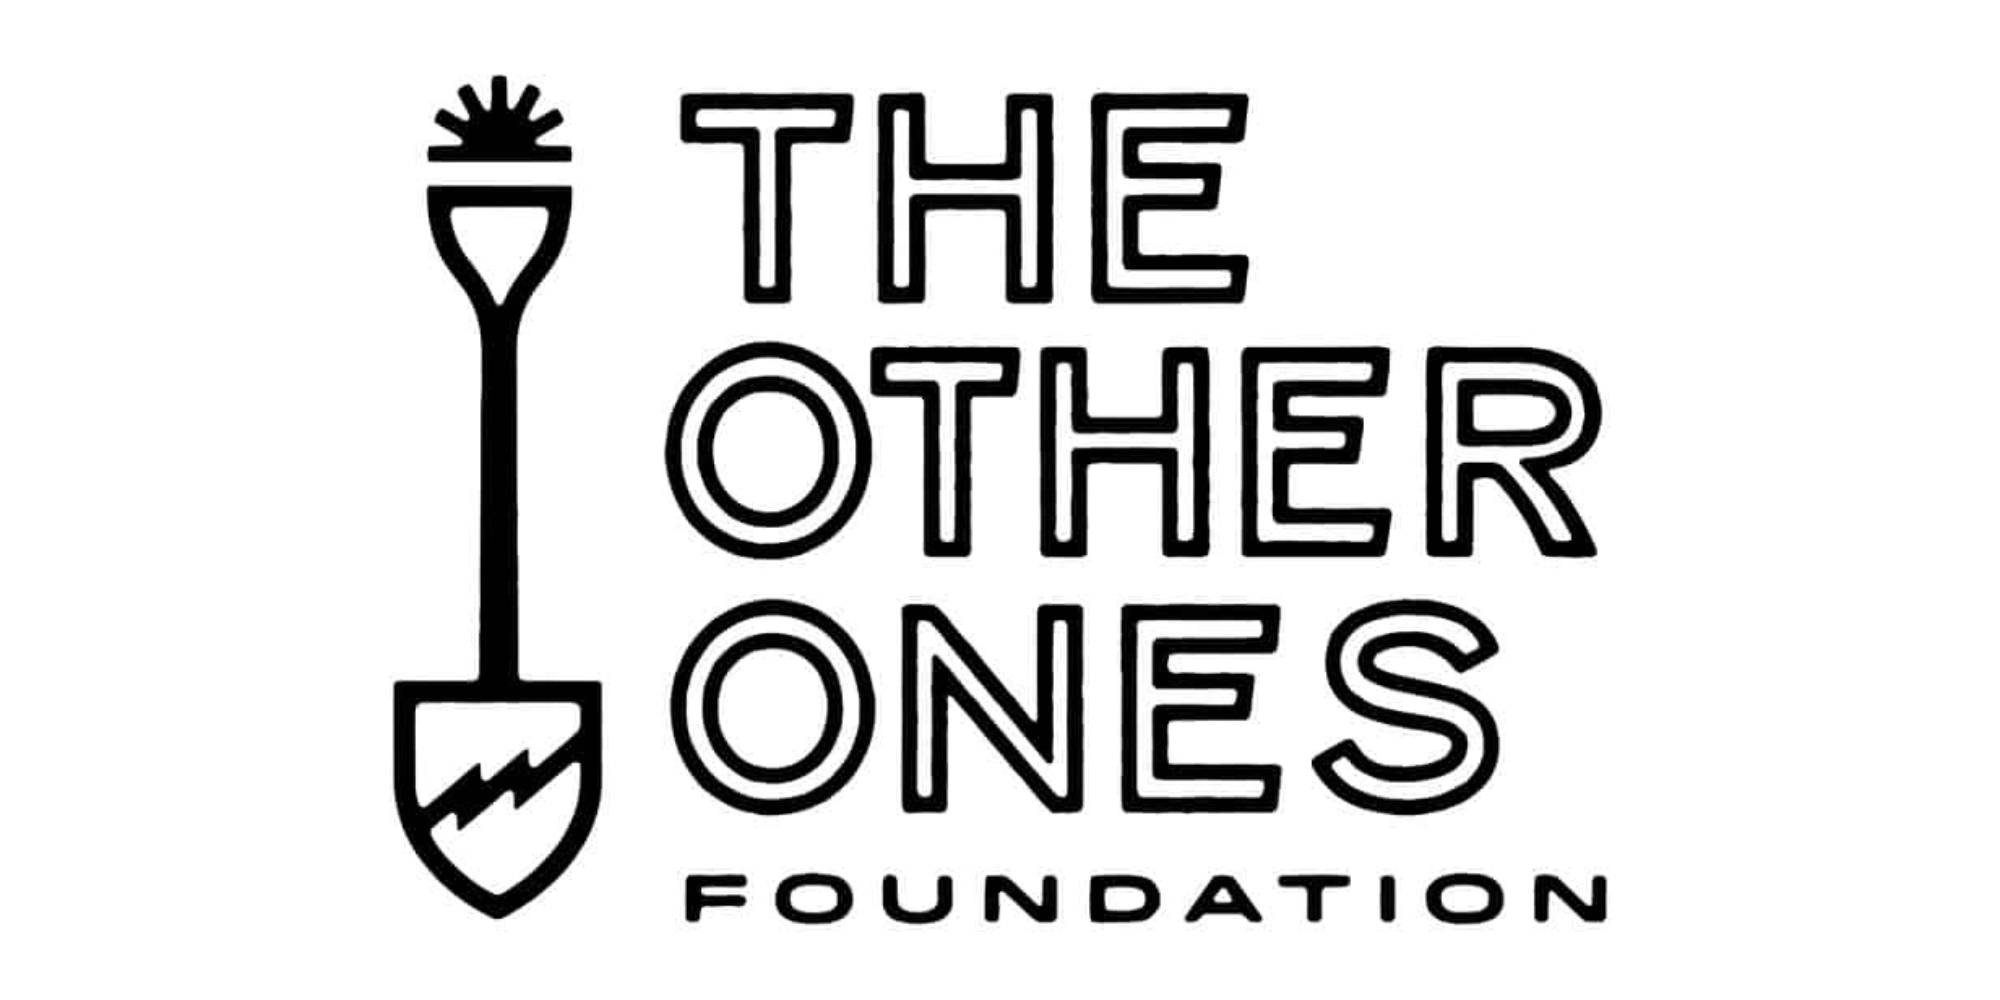 The Other Ones Foundation Logo.png